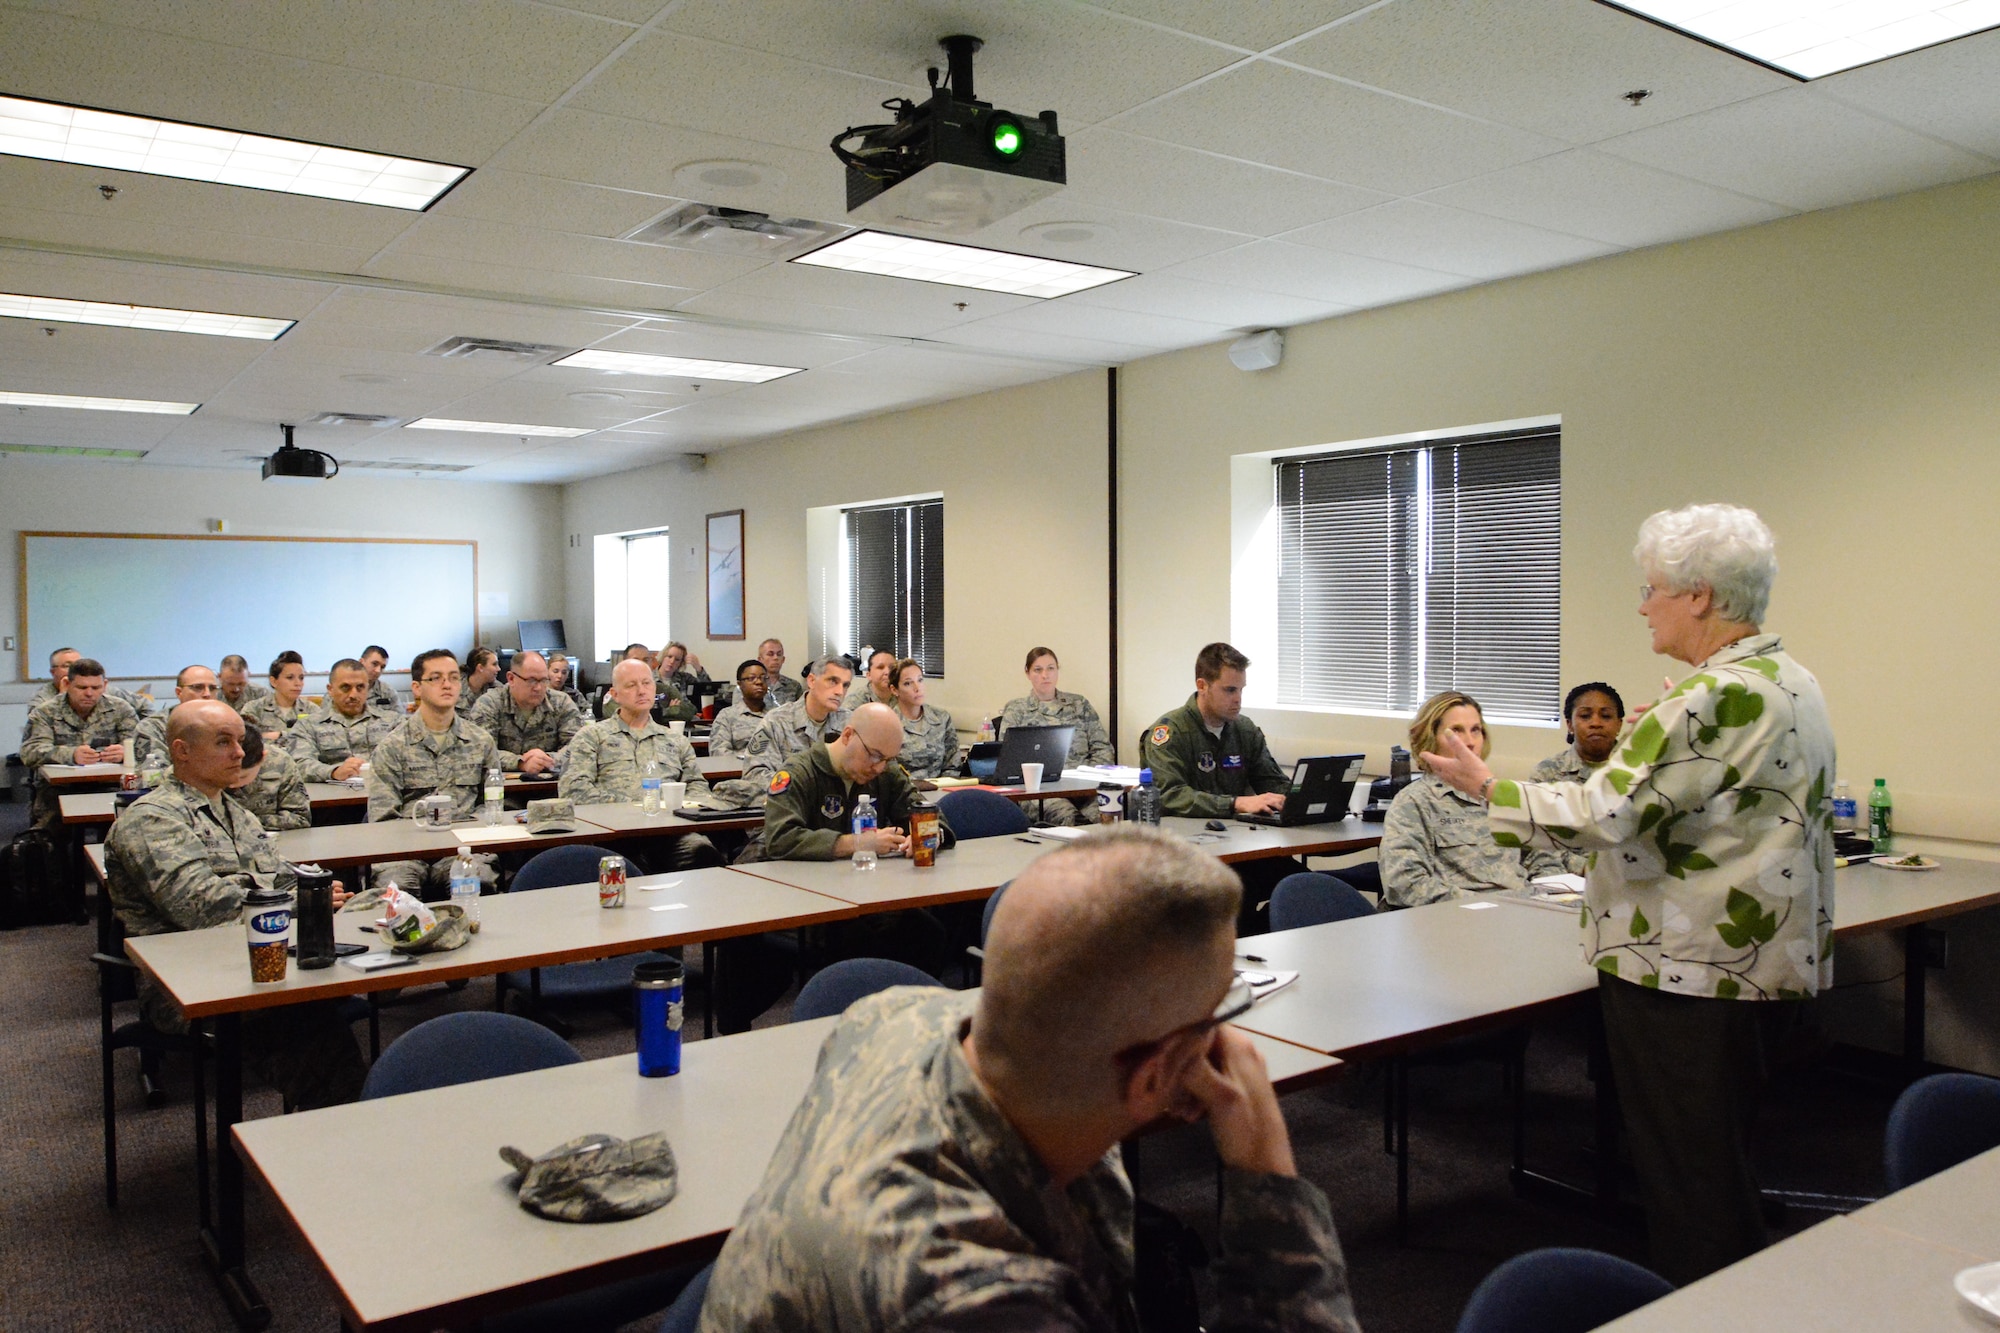 Maggie Bonner, a protocol special event management and intrnational relations specialist for the U.S. Air Force Services Agency, teaches airmen from the 139th Airlift Wing about protocol at Rosecrans Air National Guard Base in St. Joseph, Mo. on March 10, 2016. Bonner has been teaching protocol for 59 years. (U.S. Air National Guard photo by Senior Airman Bruce Jenkins/Released)